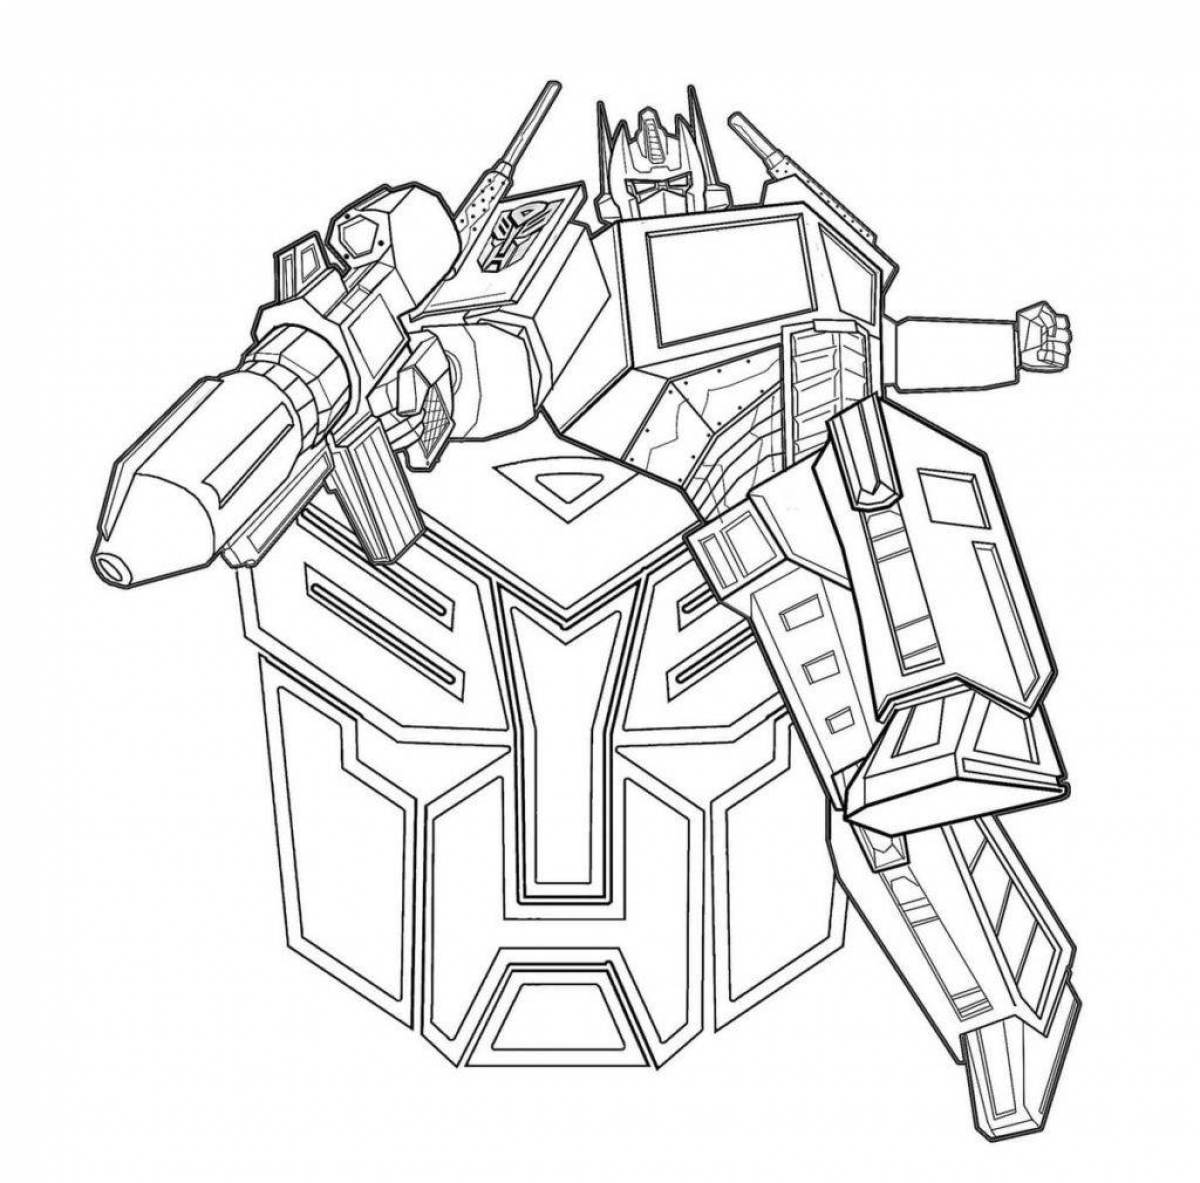 Exciting transformers coloring pages for kids